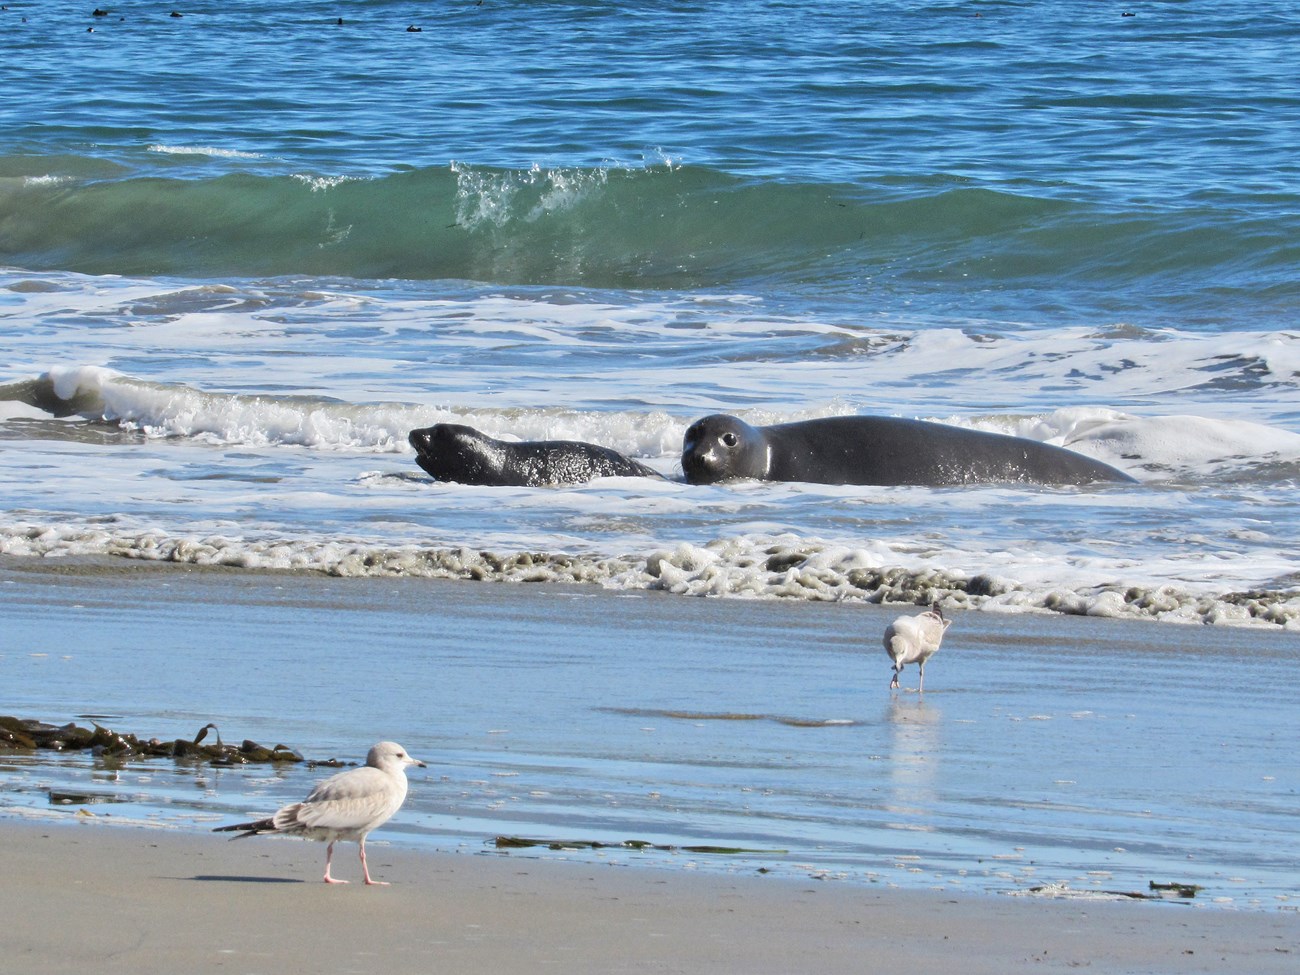 Female elephant seal with her pup in calm surf on a bright sunny day.